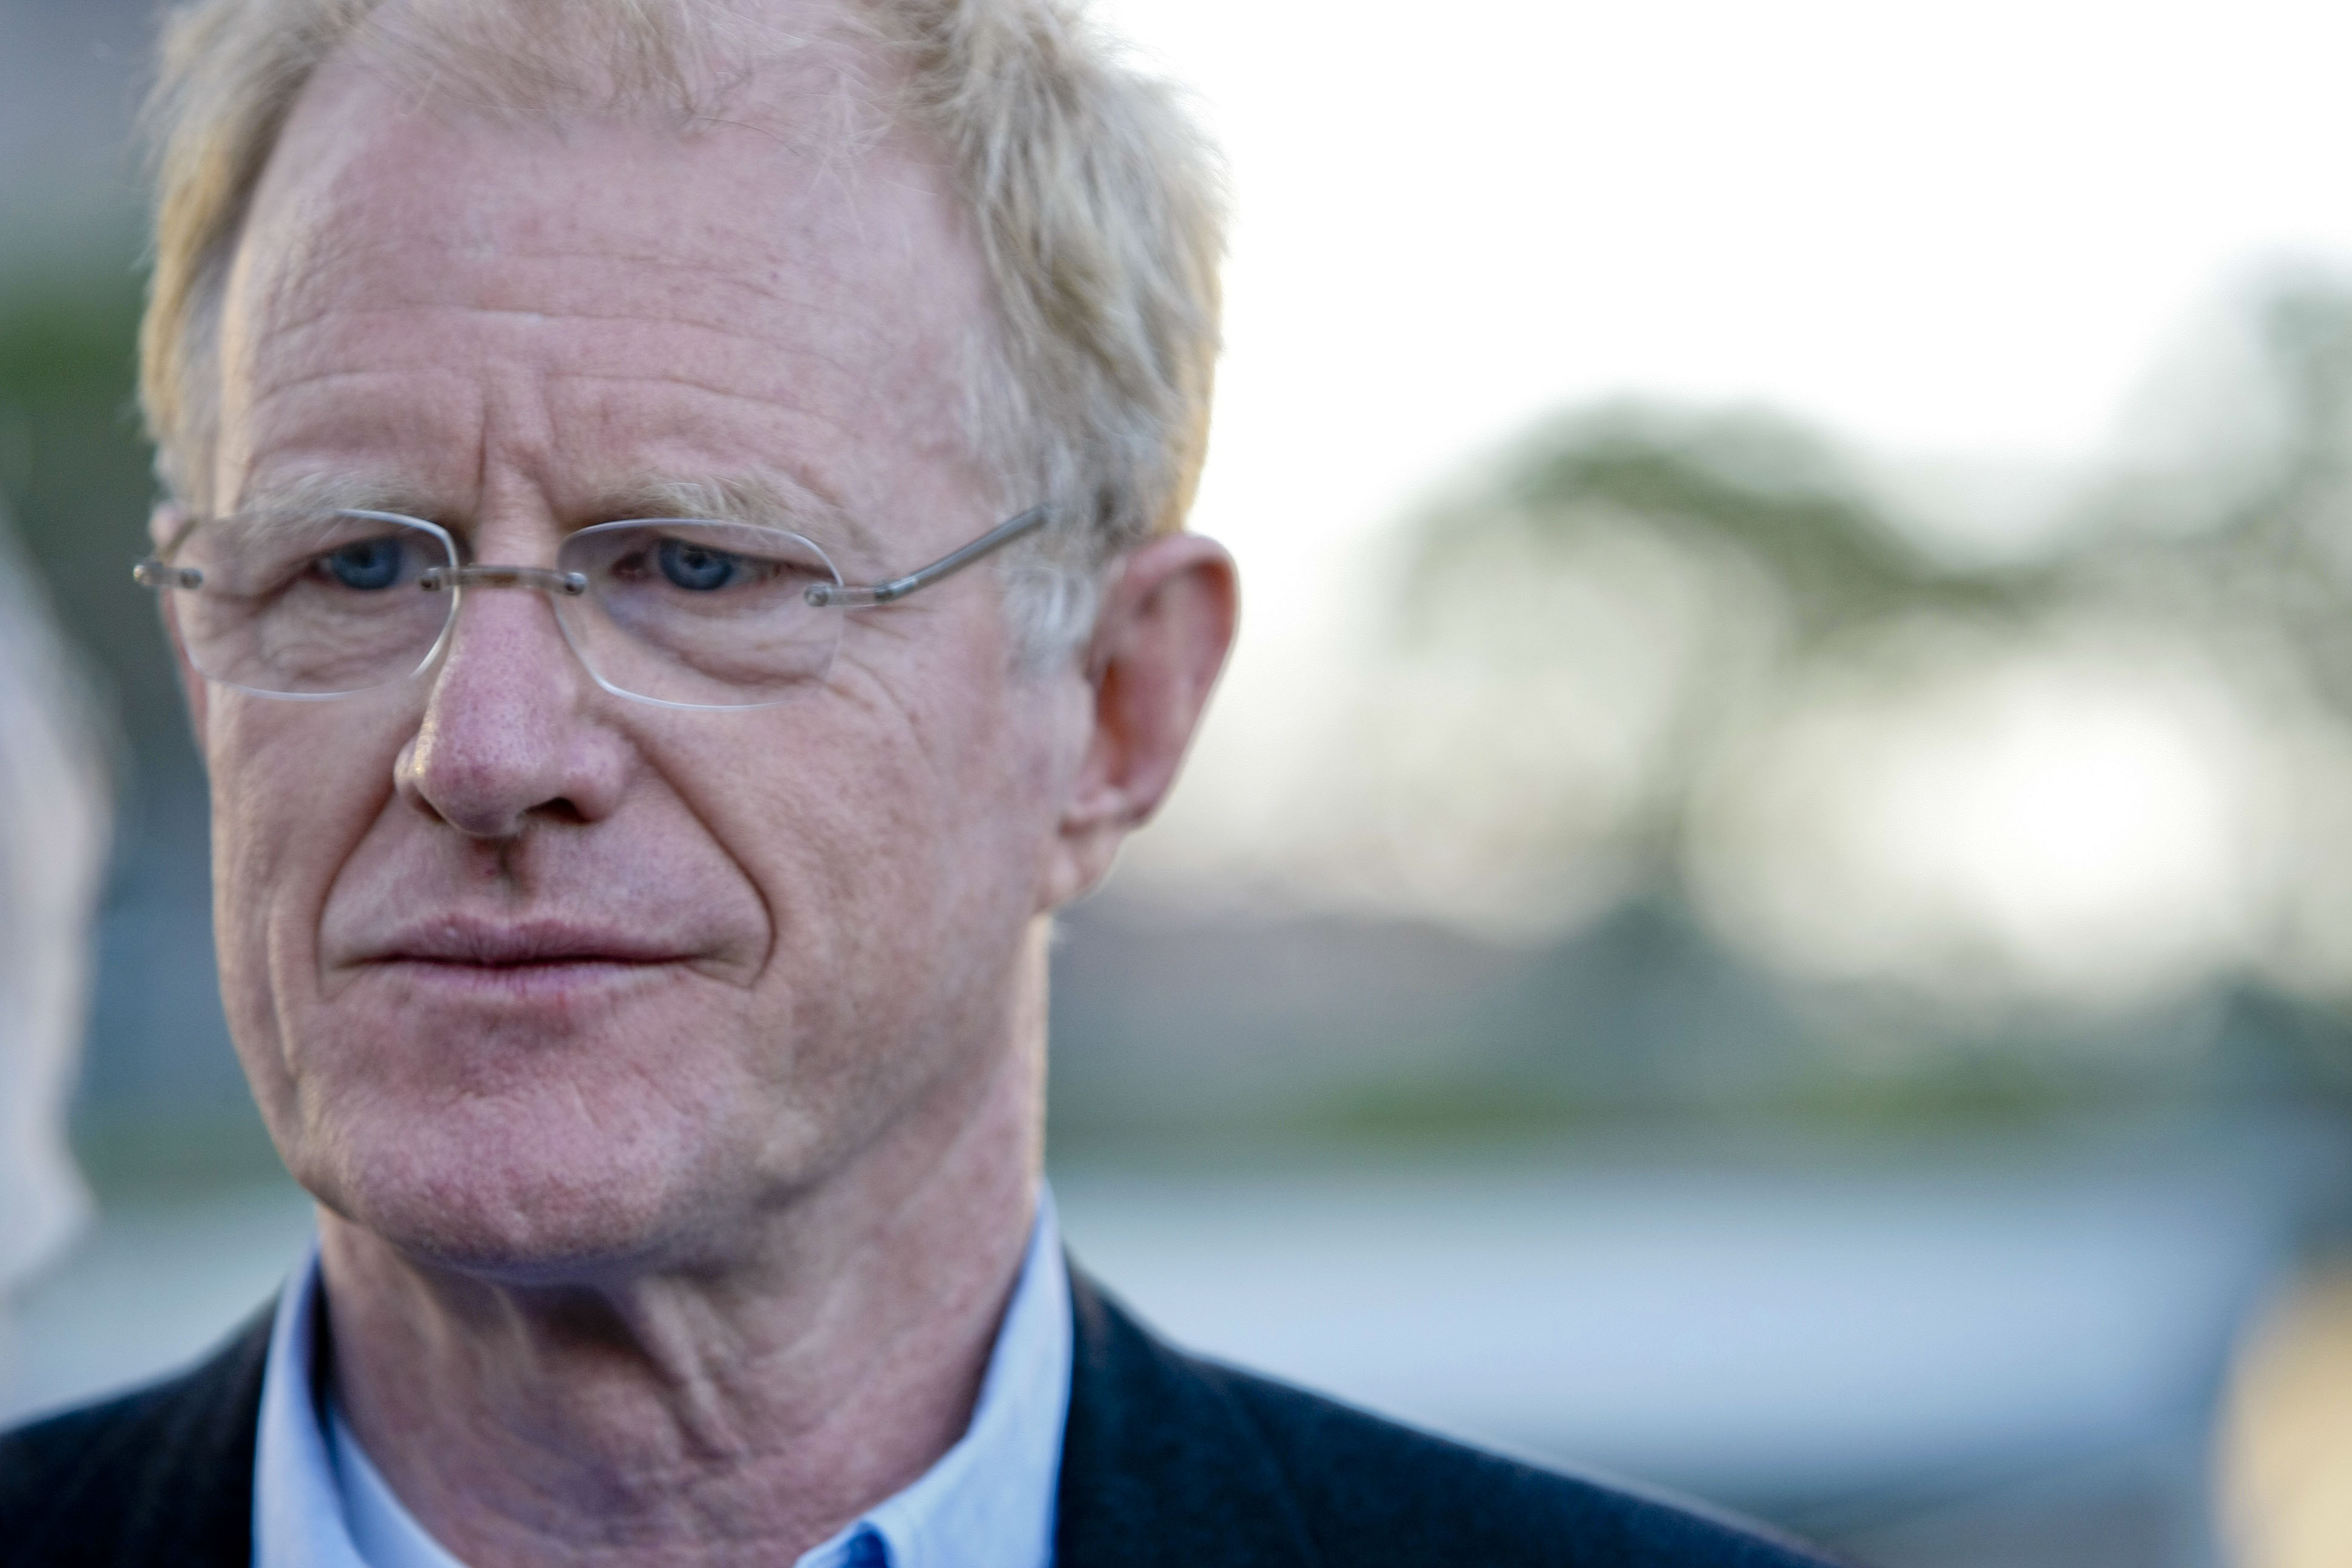 Ed Begley Jr. at the LA Film Festival in Los Angeles, California on June 25, 2010 | Source: Getty Images